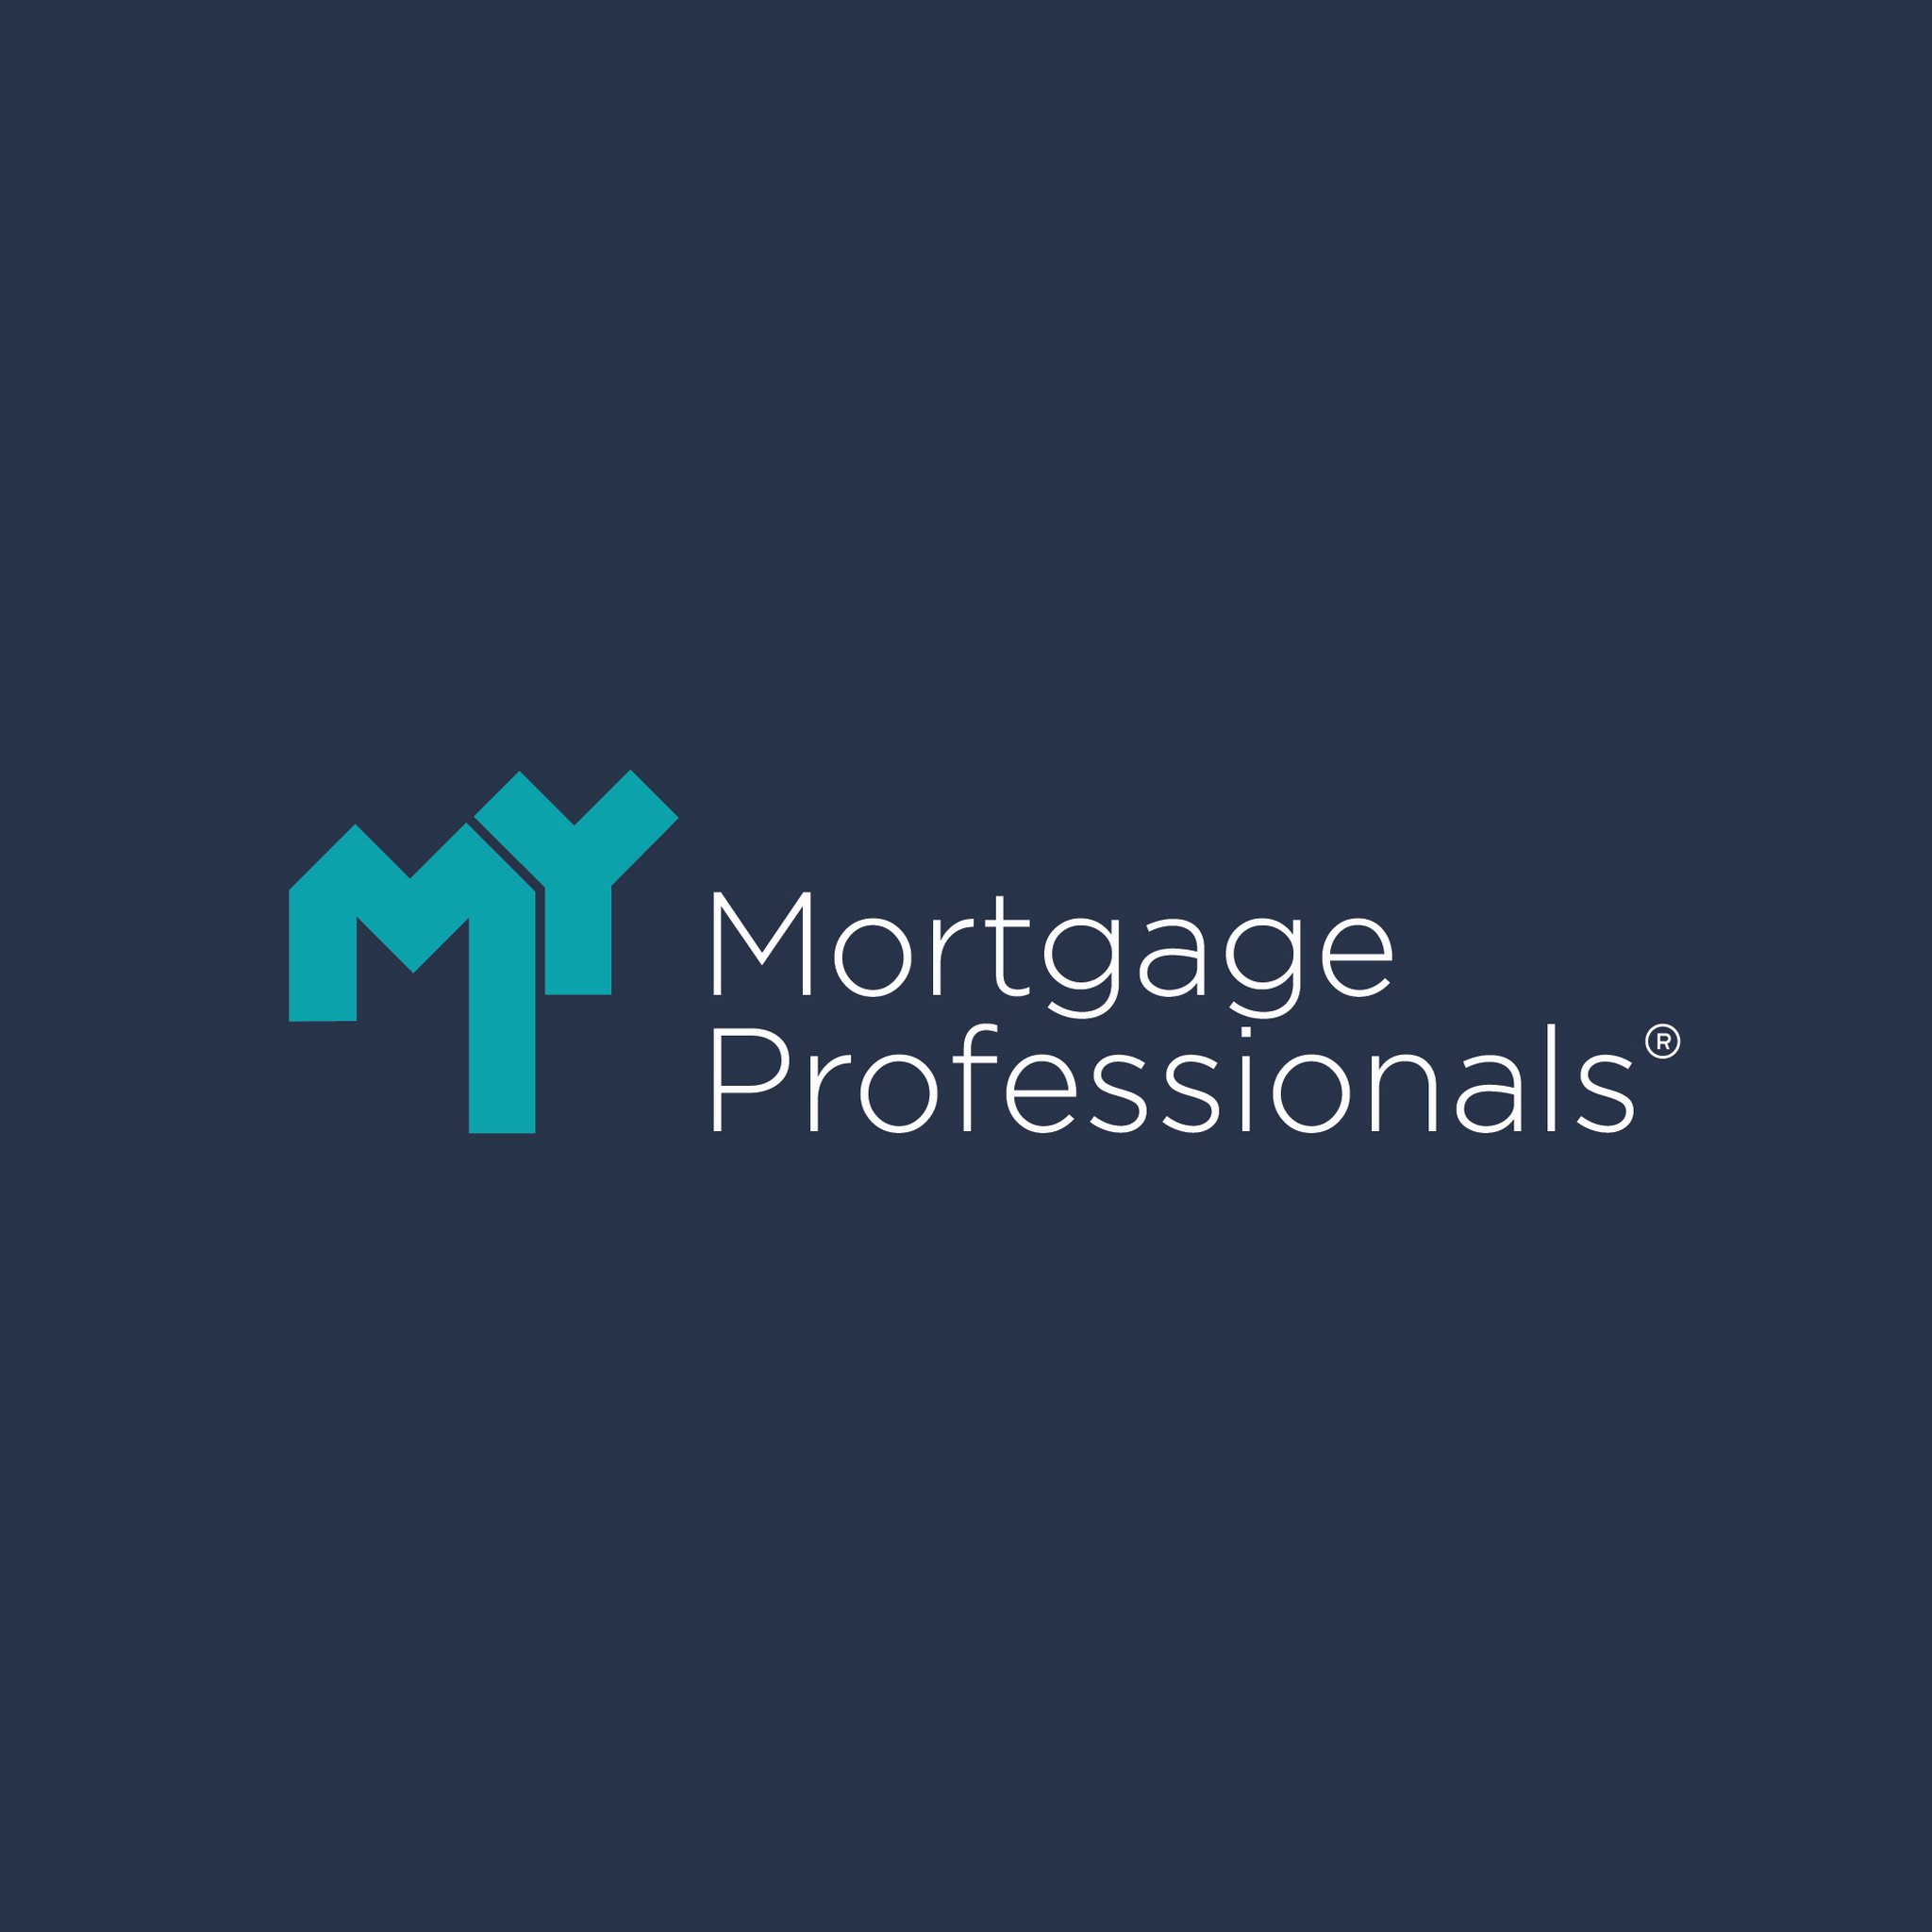 My Mortgage Professionals Glenmore Park 0418 119 118